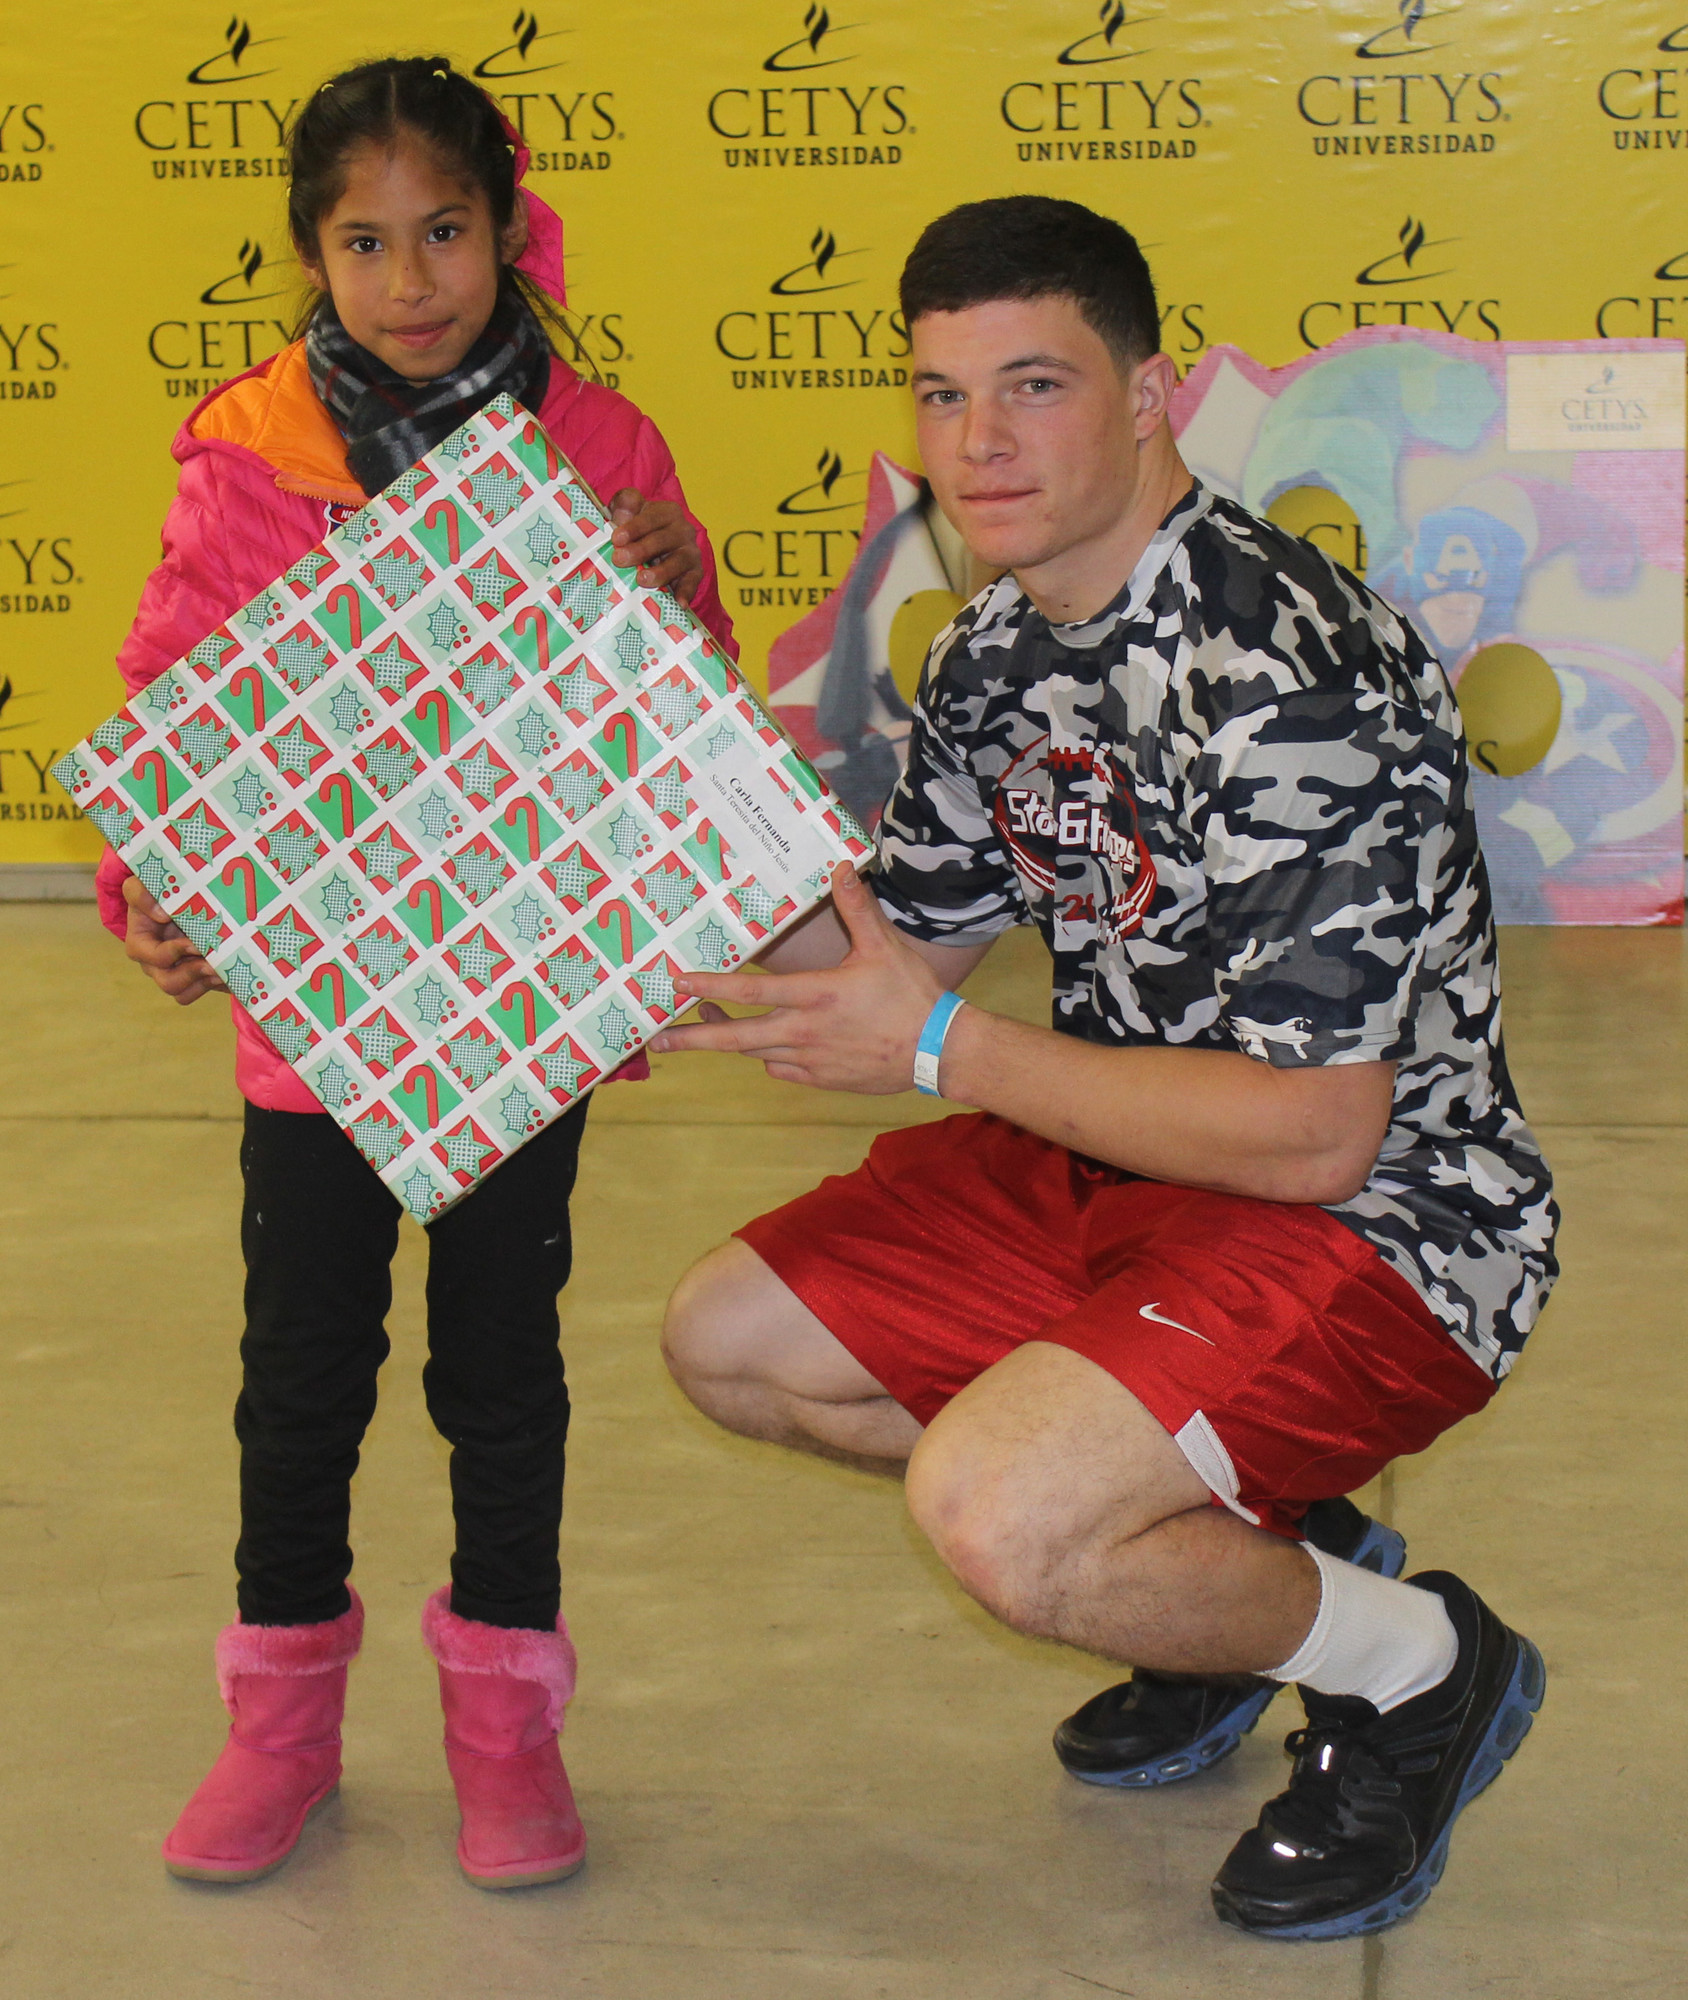 USMMA senior Matt McDaniels visited with a local orphanage prior to his participation in the Bowl of the Stars football game in Baja, Mexico on Dec. 20.